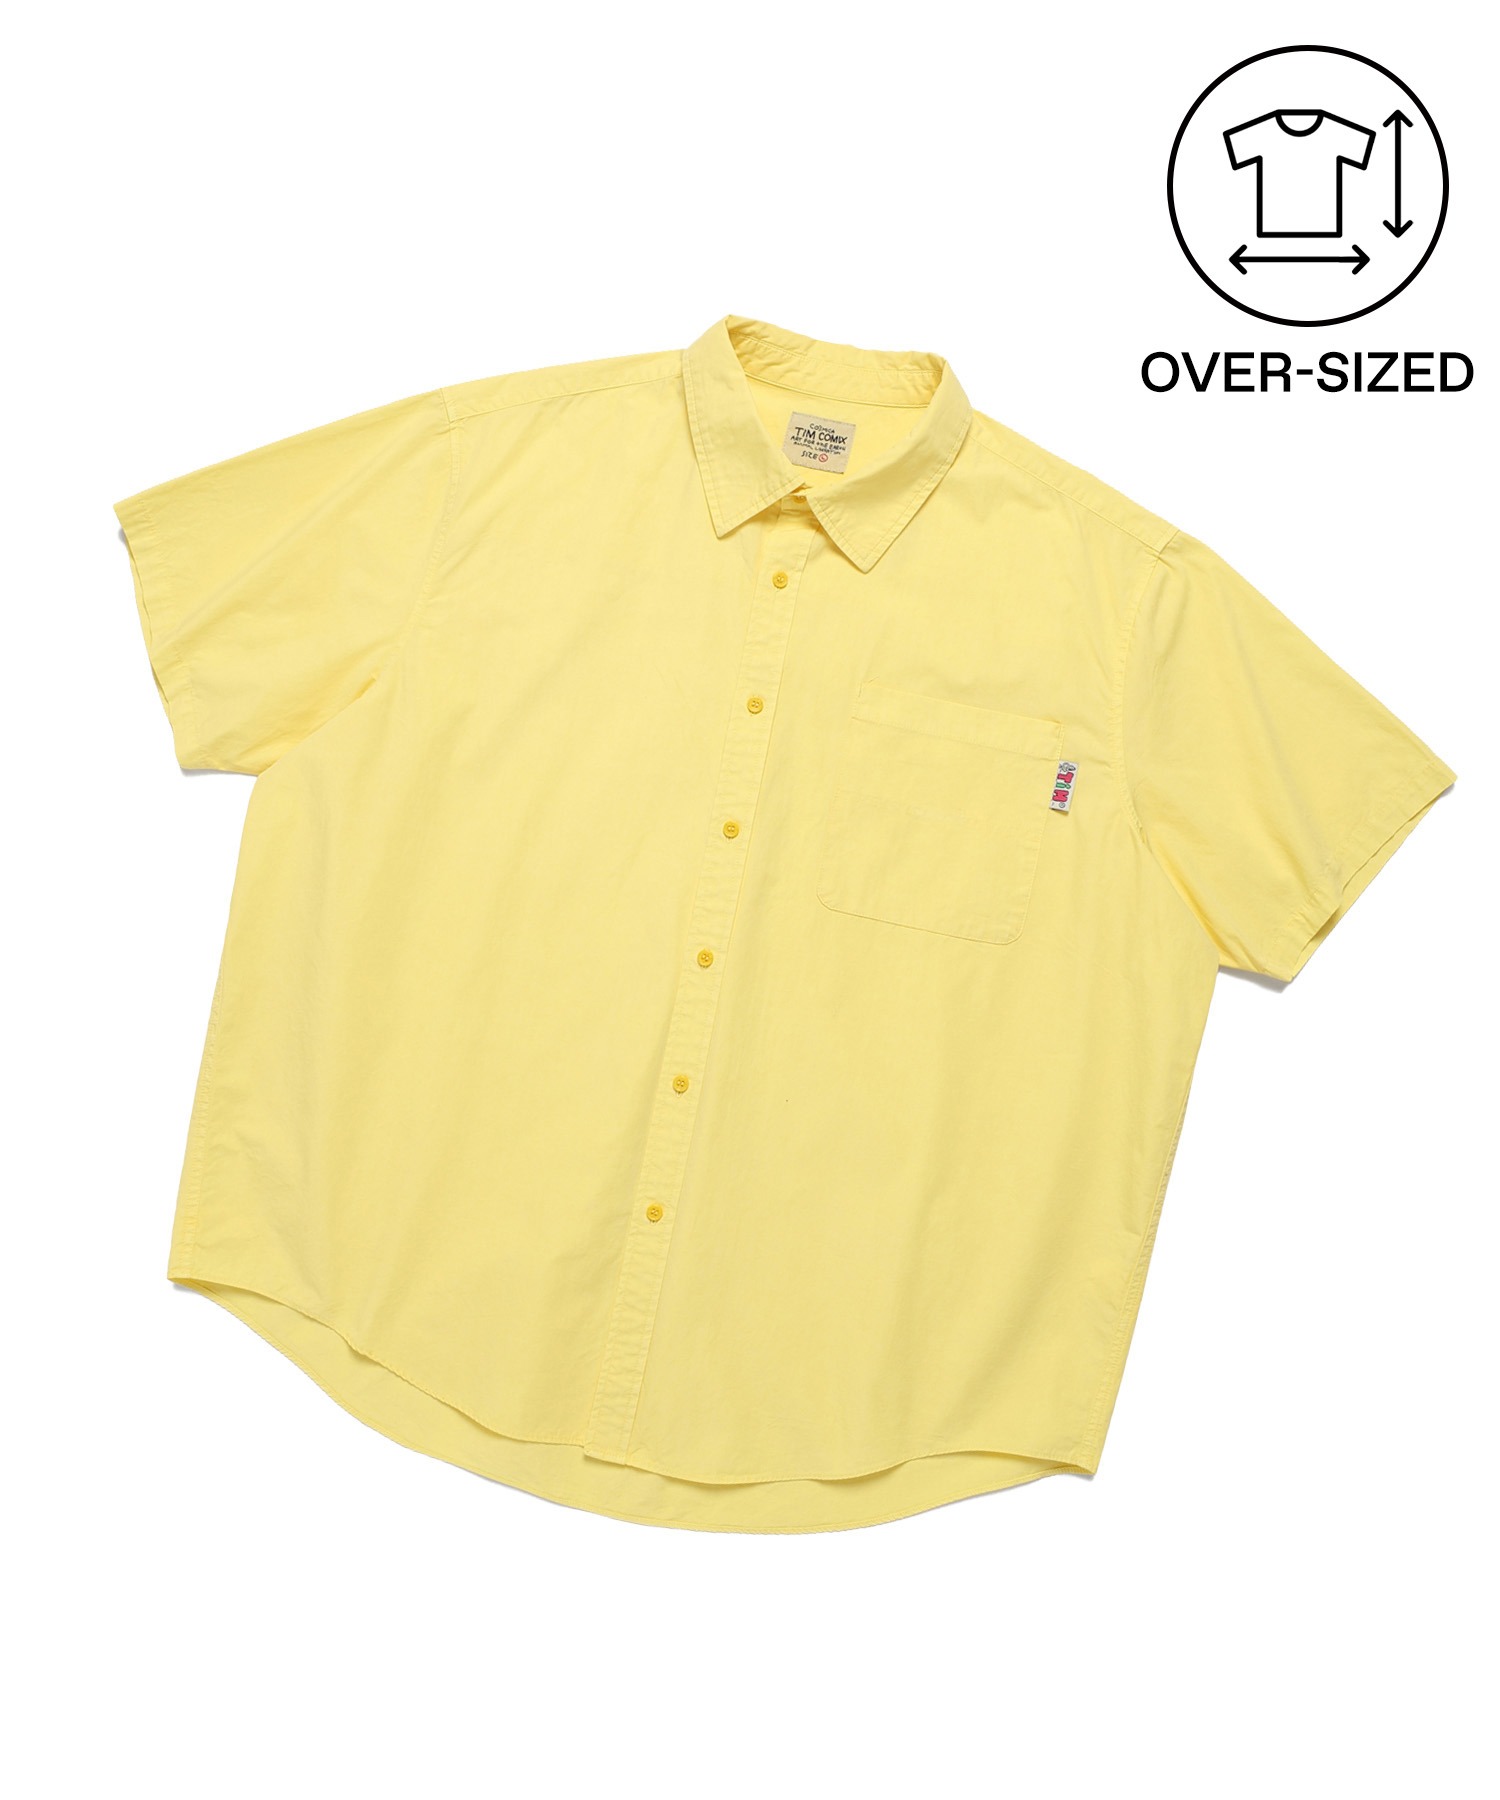 [OVER-SIZED] VAMOS POCKET SOLID SS SHIRT PG YELLOW